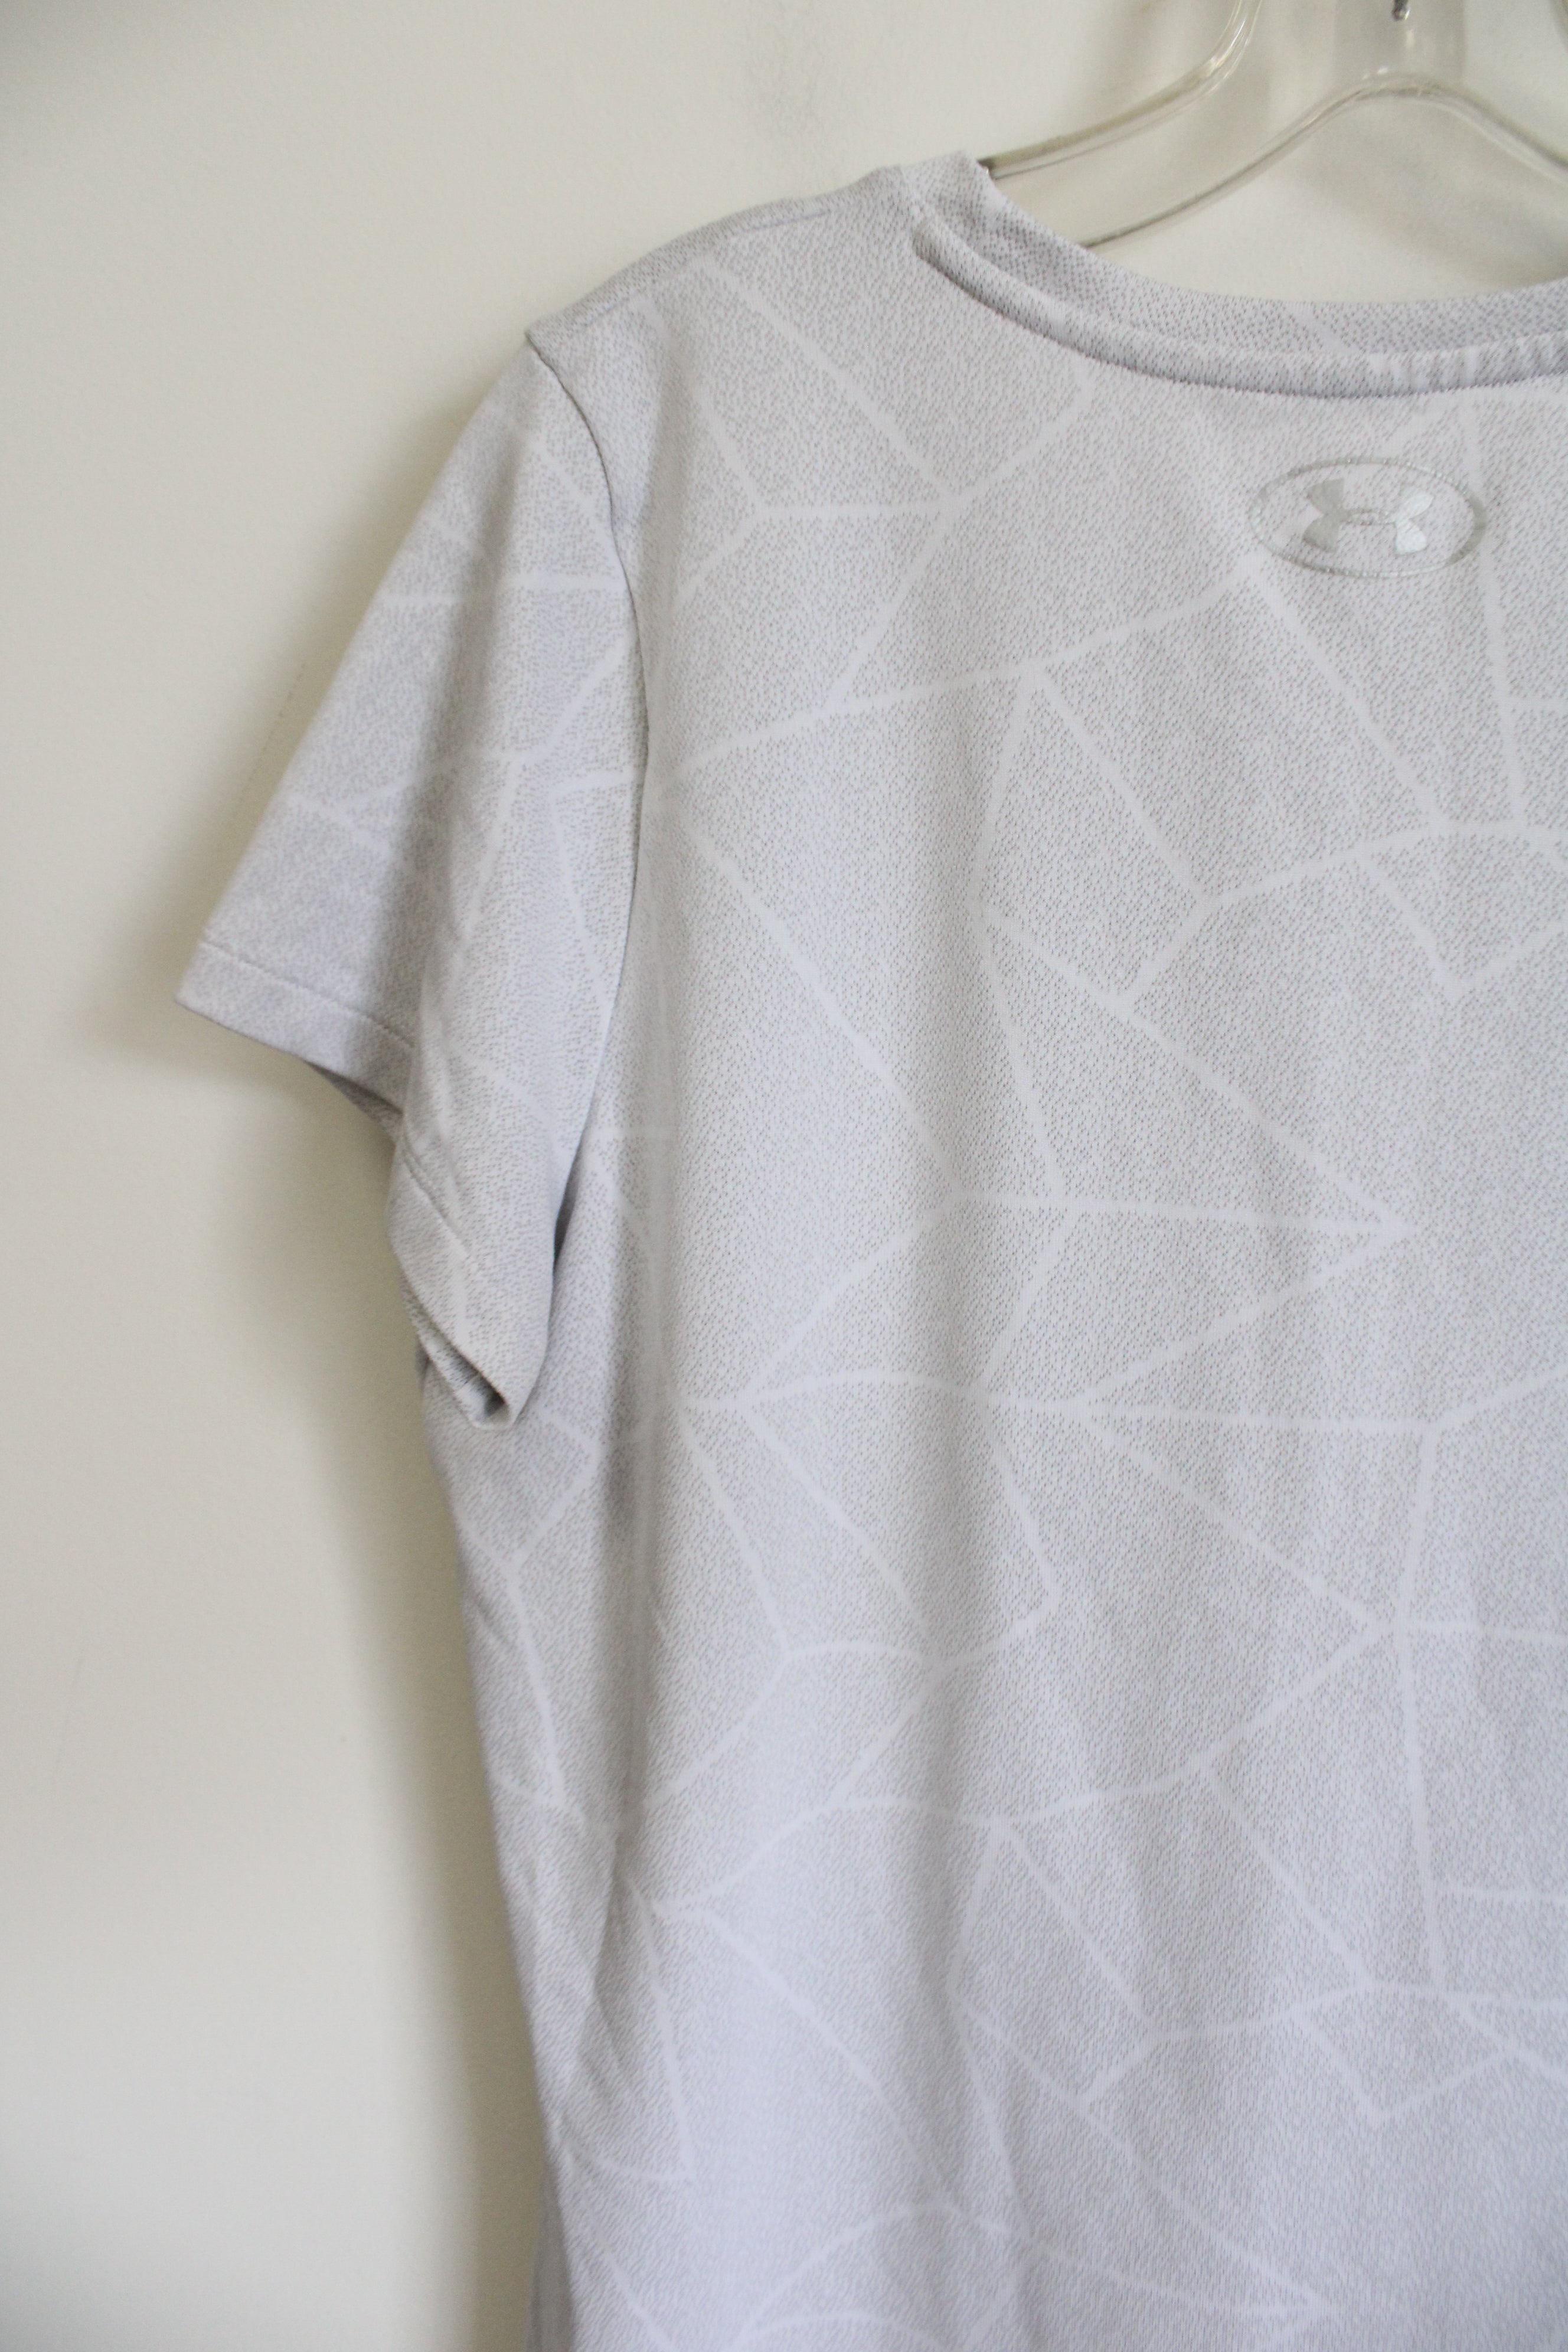 Under Armour Gray White Patterned Top | L